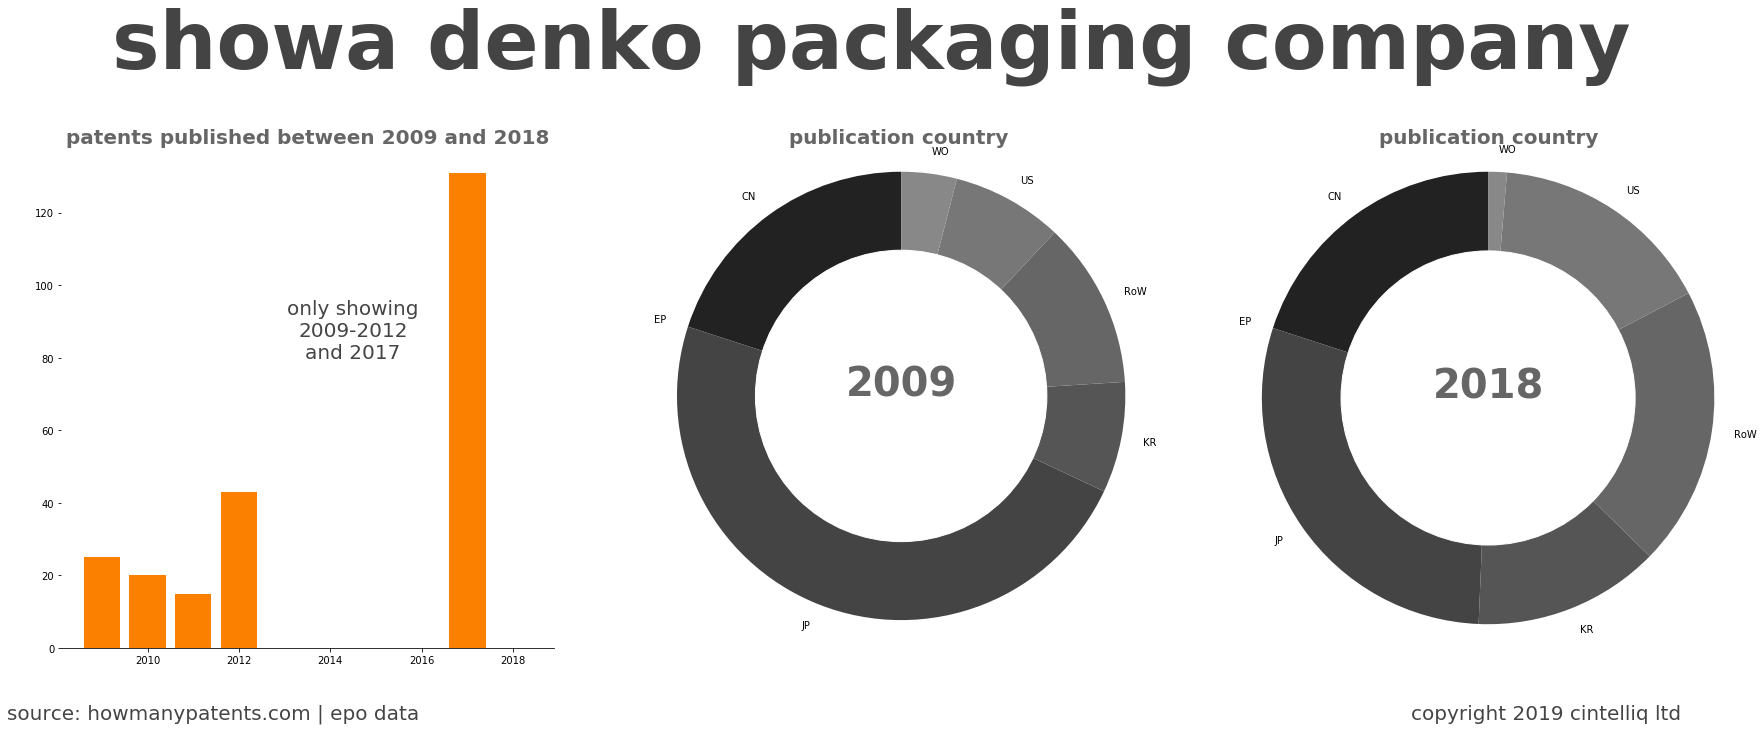 summary of patents for Showa Denko Packaging Company